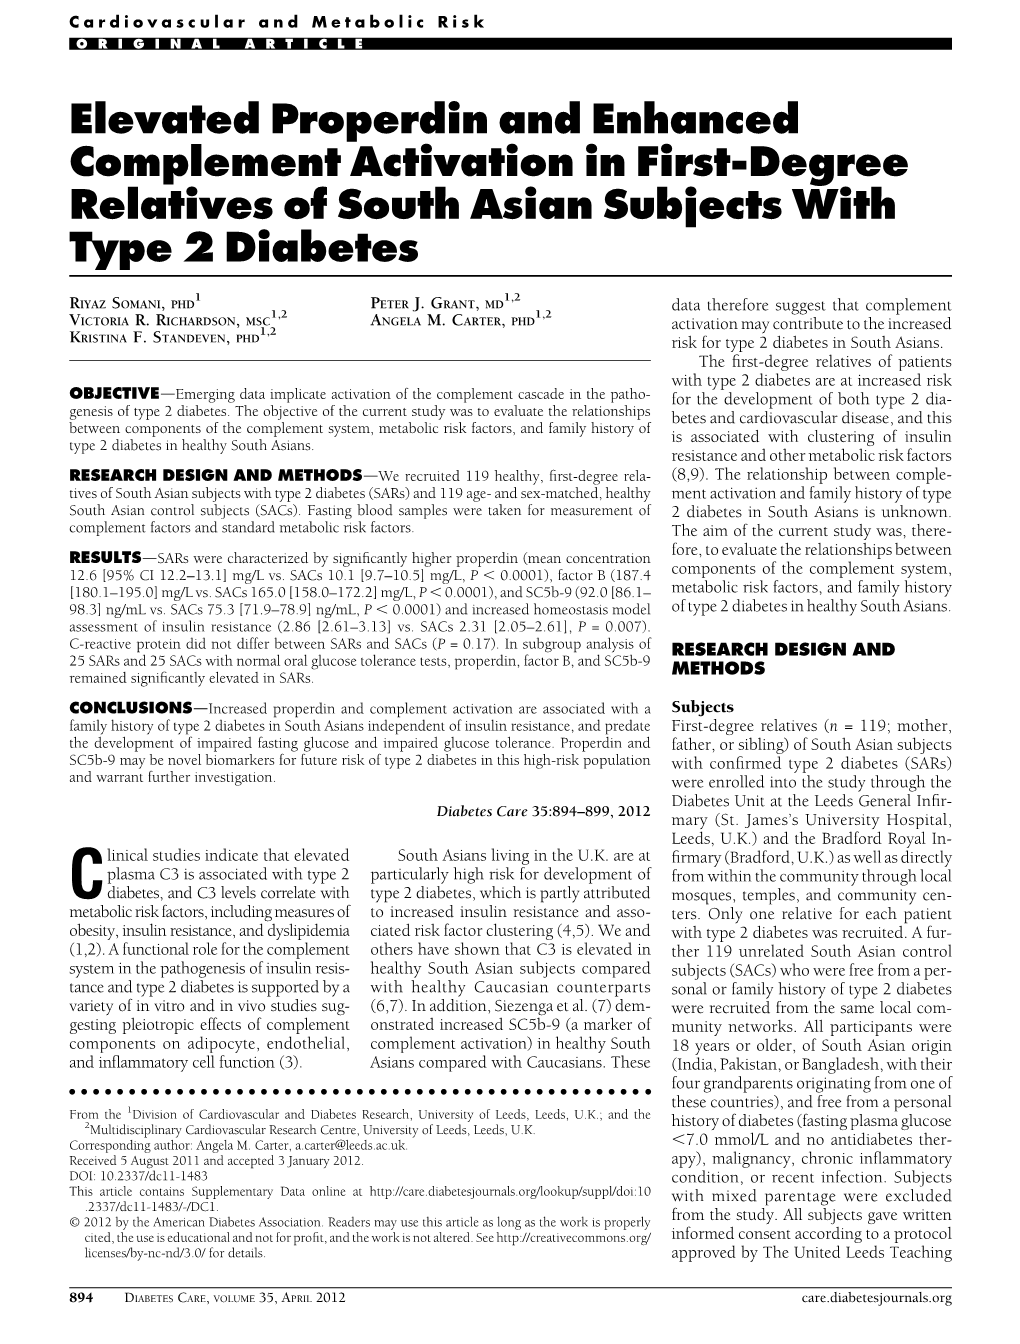 Elevated Properdin and Enhanced Complement Activation in First-Degree Relatives of South Asian Subjects with Type 2 Diabetes